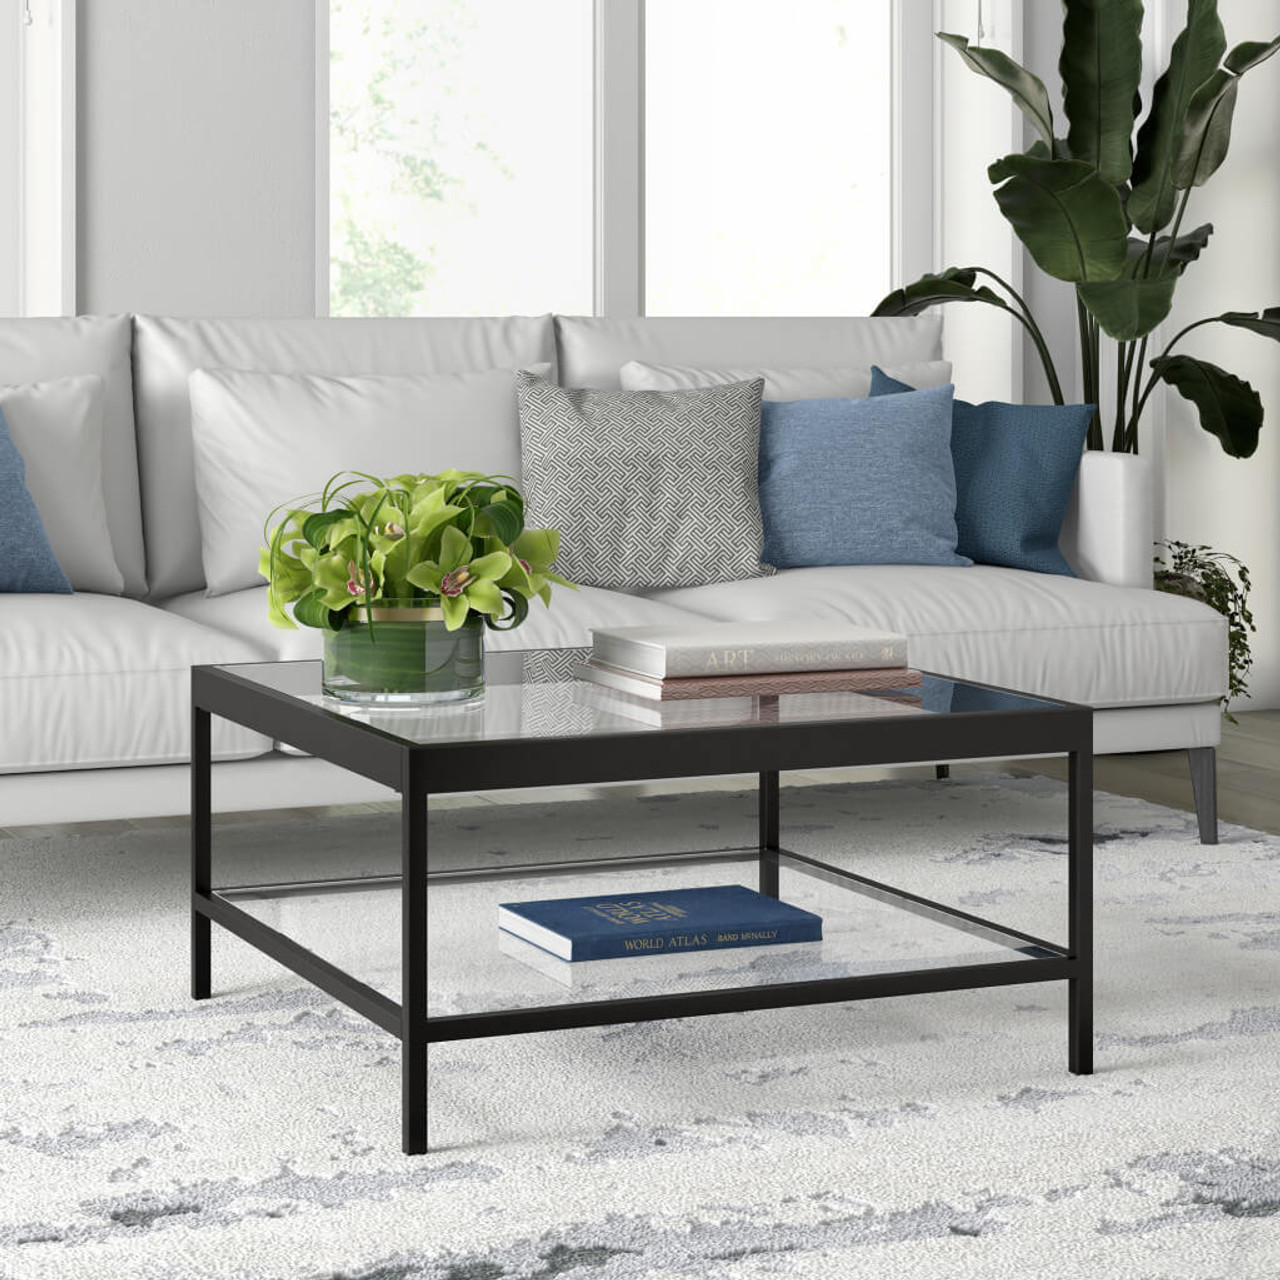 32" Black Glass And Steel Square Coffee Table With Shelf